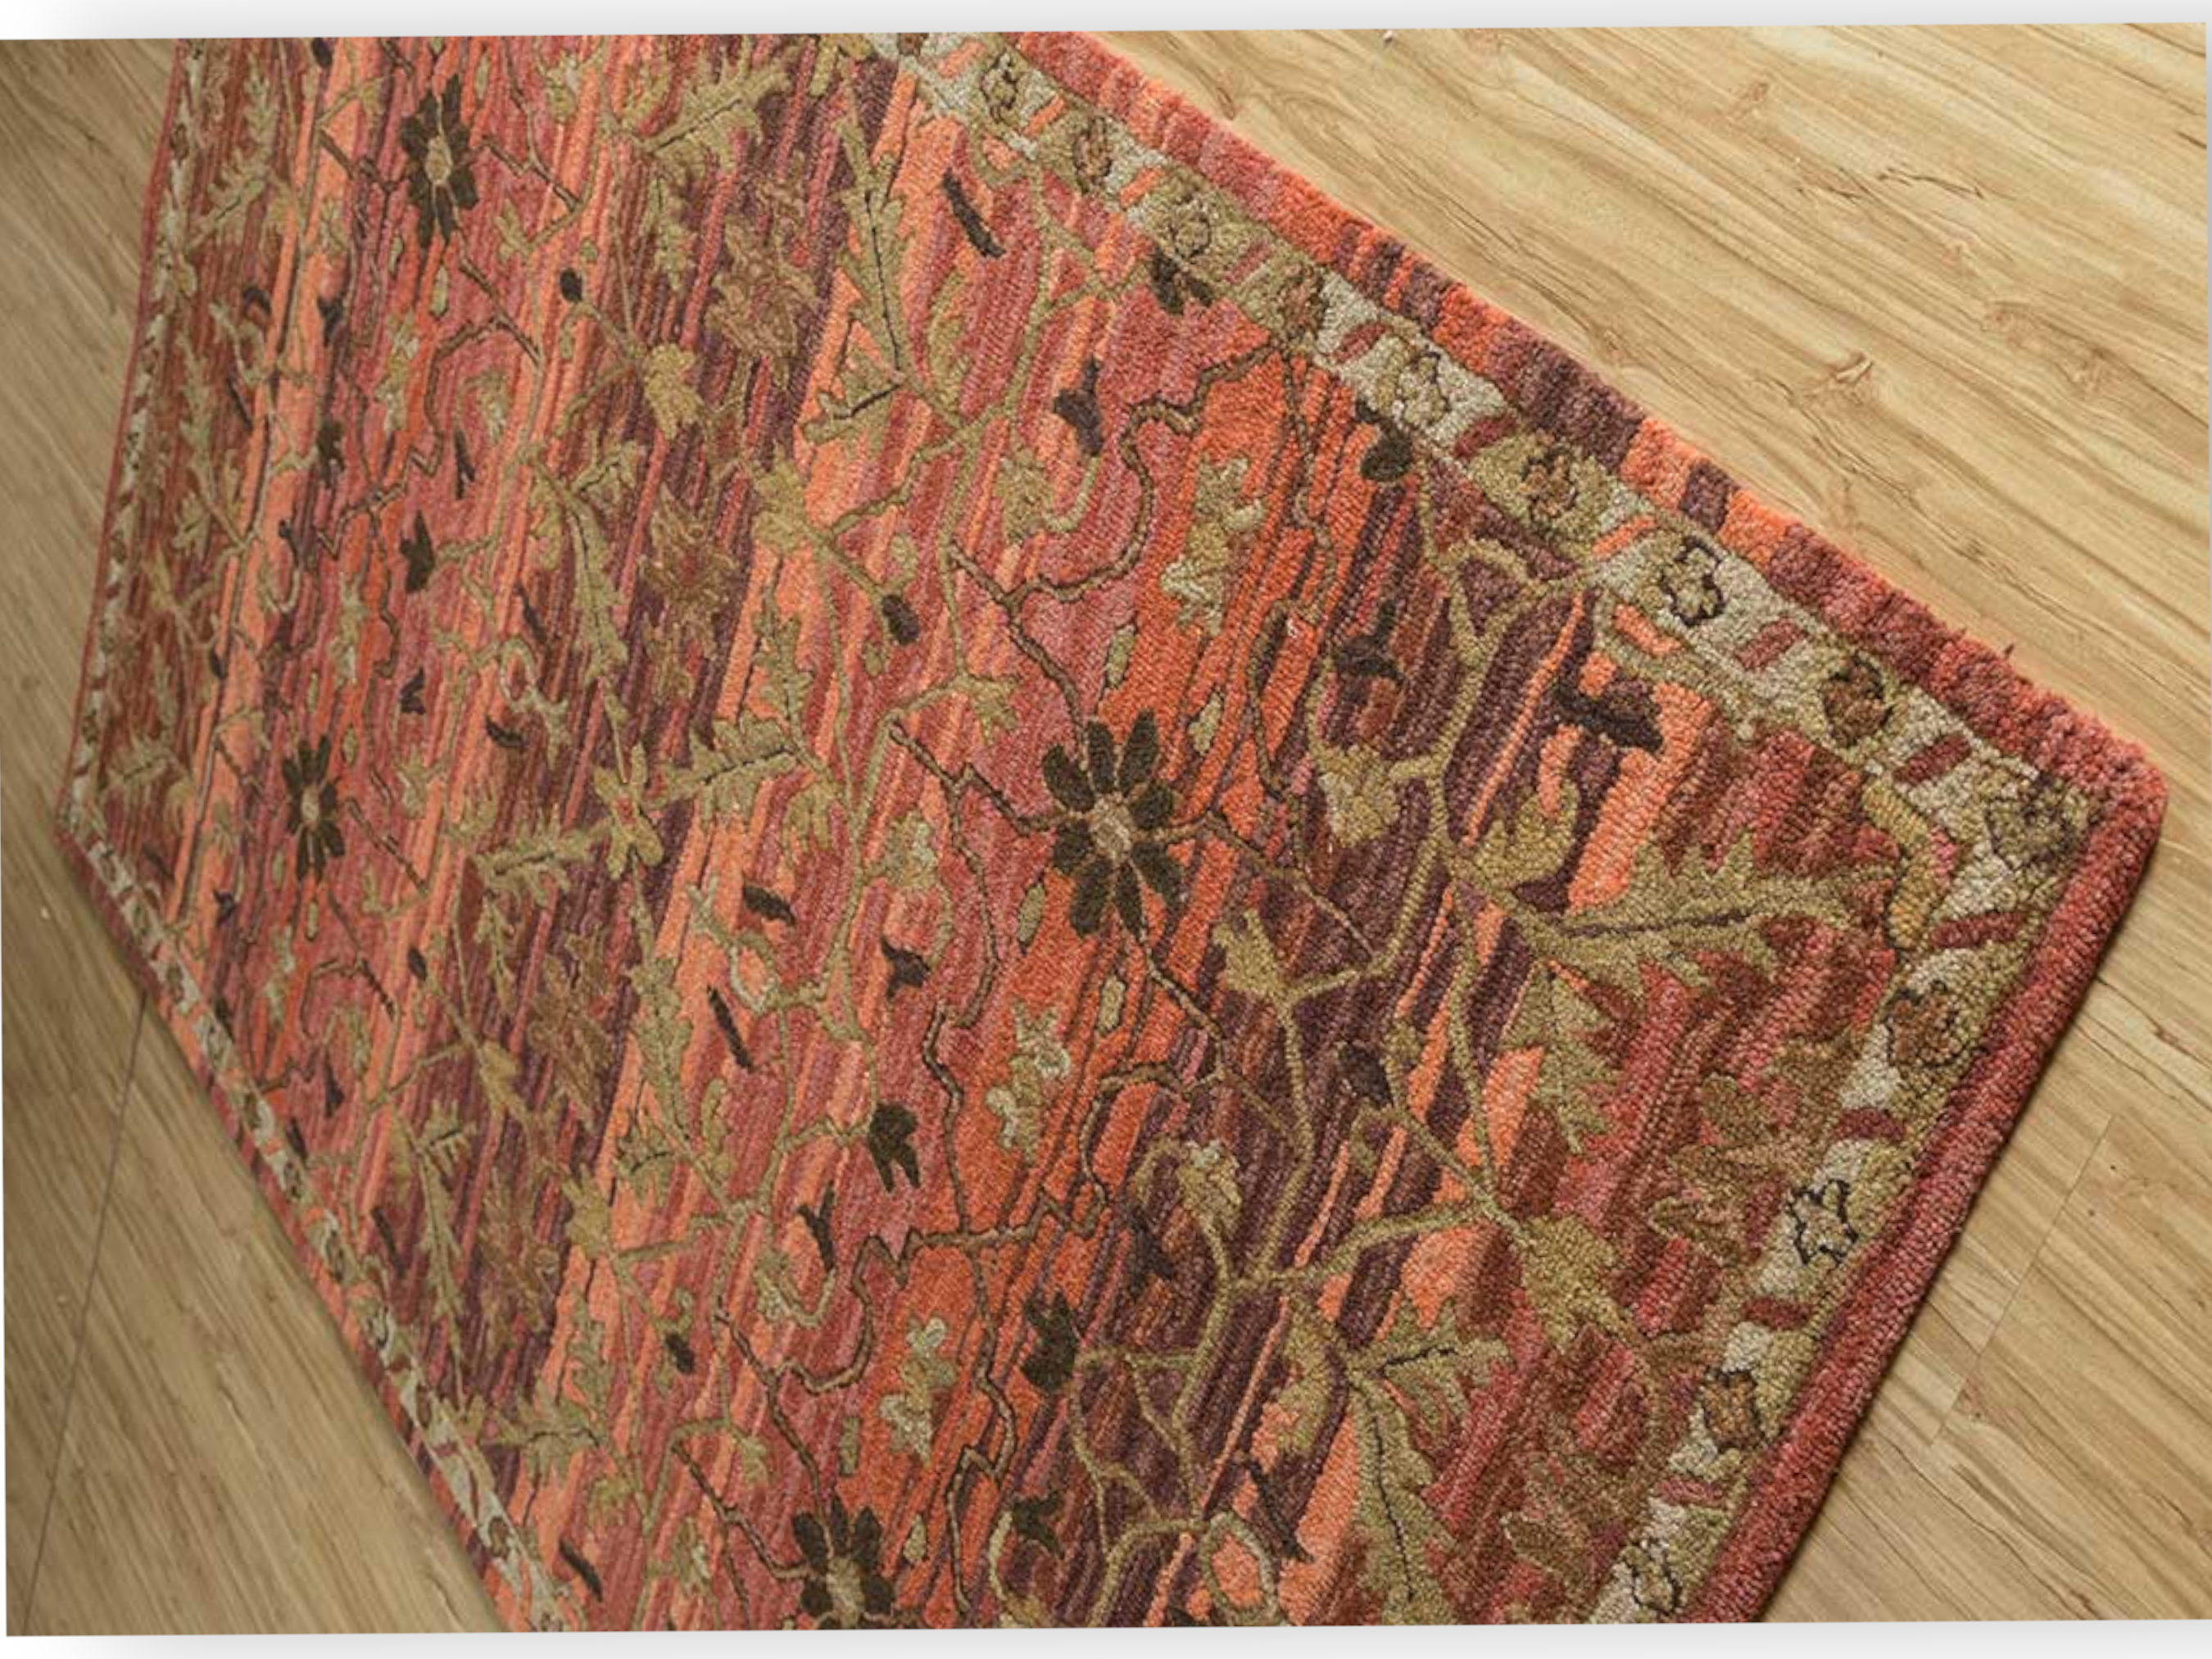 Handmade Persian Antique Designer Traditional Hand Tufted 100% Woolen Area Rugs/ Carpets For Living Room, Bedroom, Kitchen